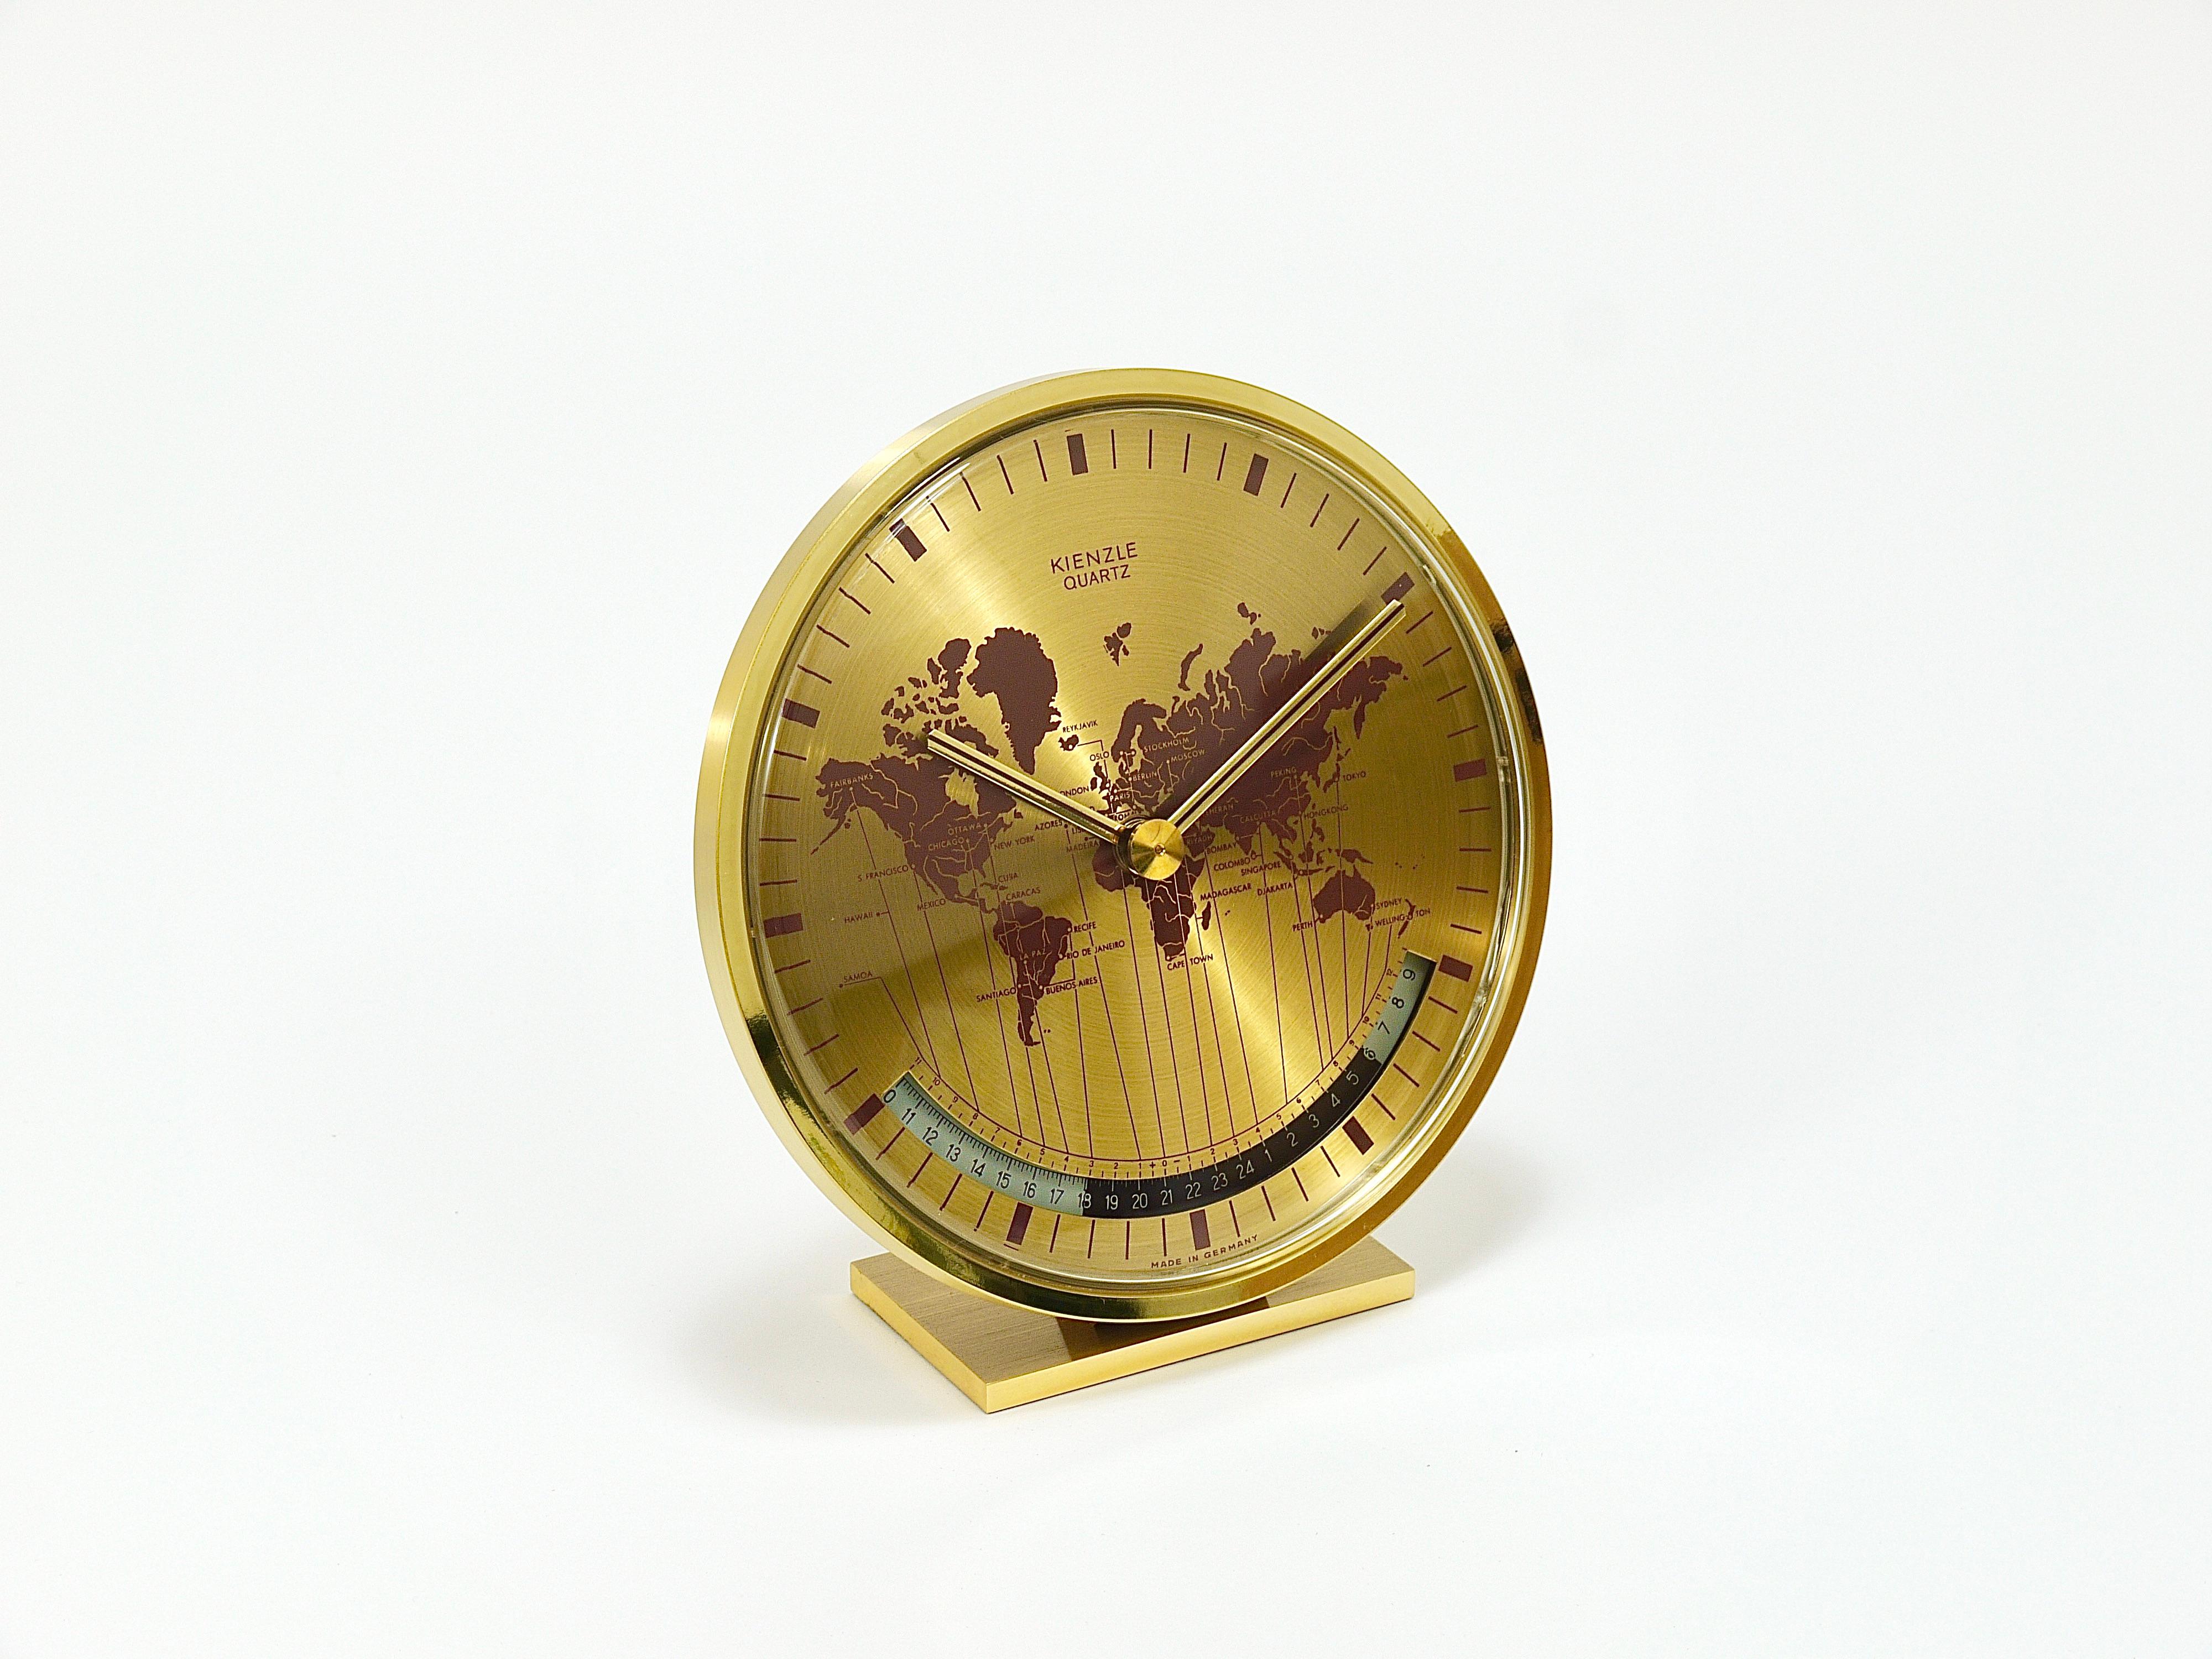 Kienzle GMT World Time Zone Brass Table Clock, Midcentury, Germany, 1960s For Sale 6